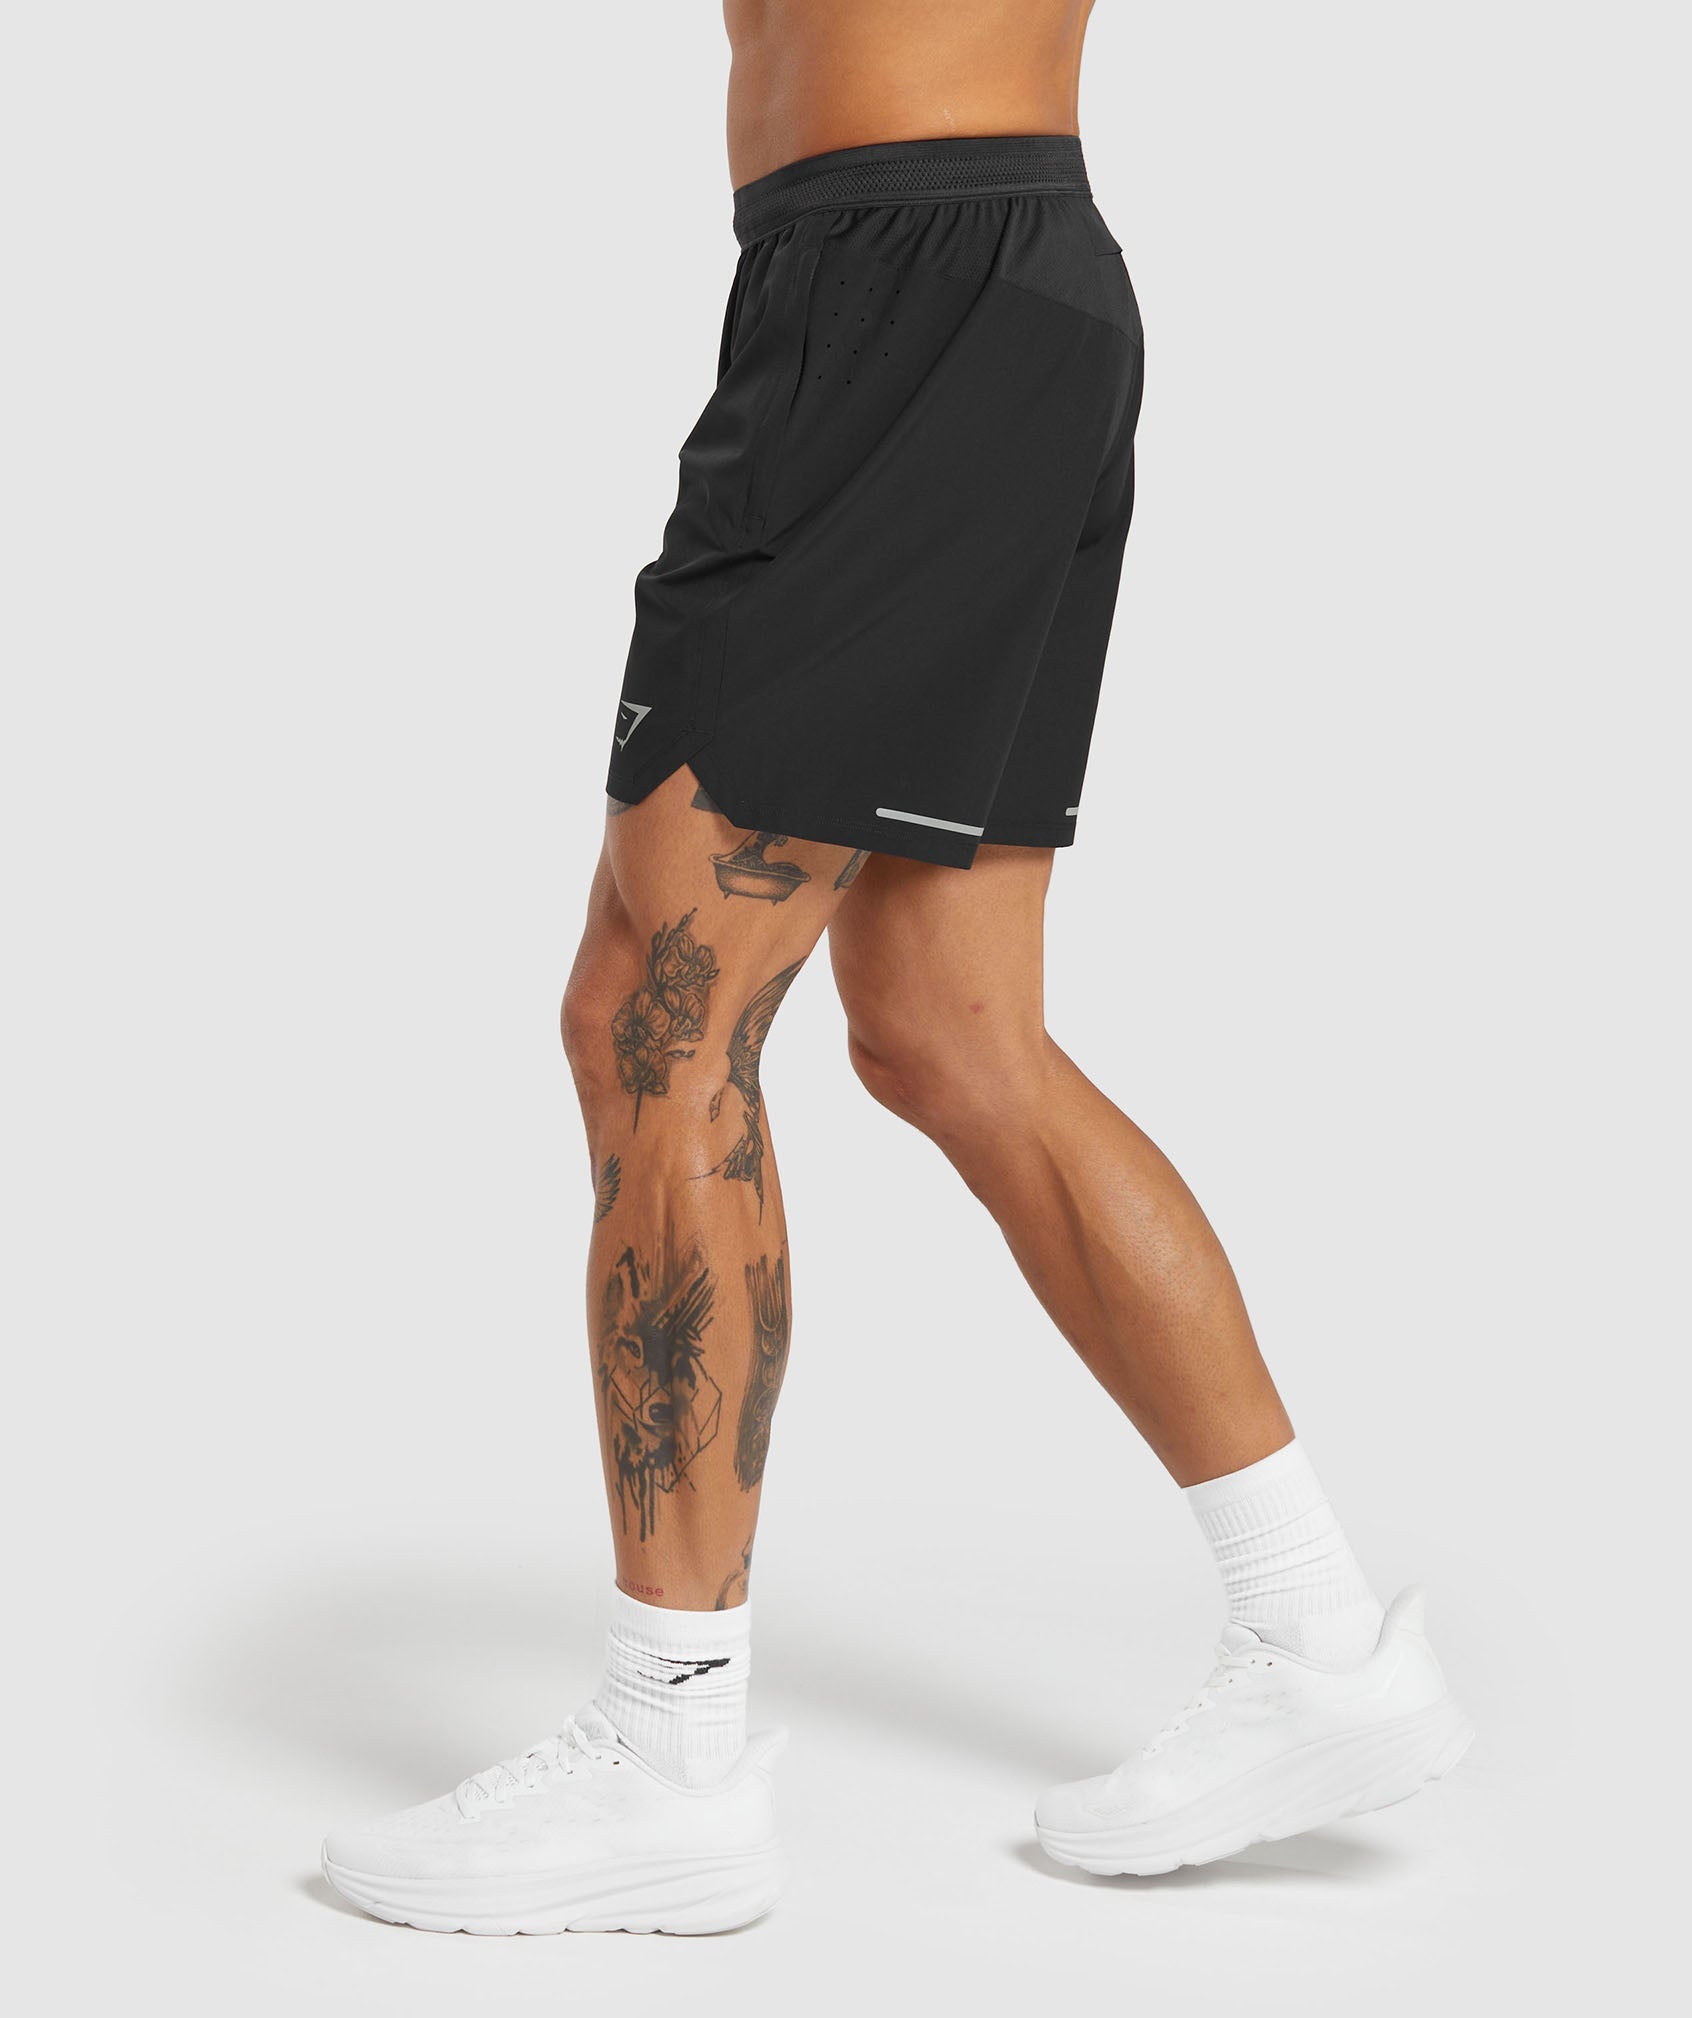 Speed 7" Shorts in Black - view 3